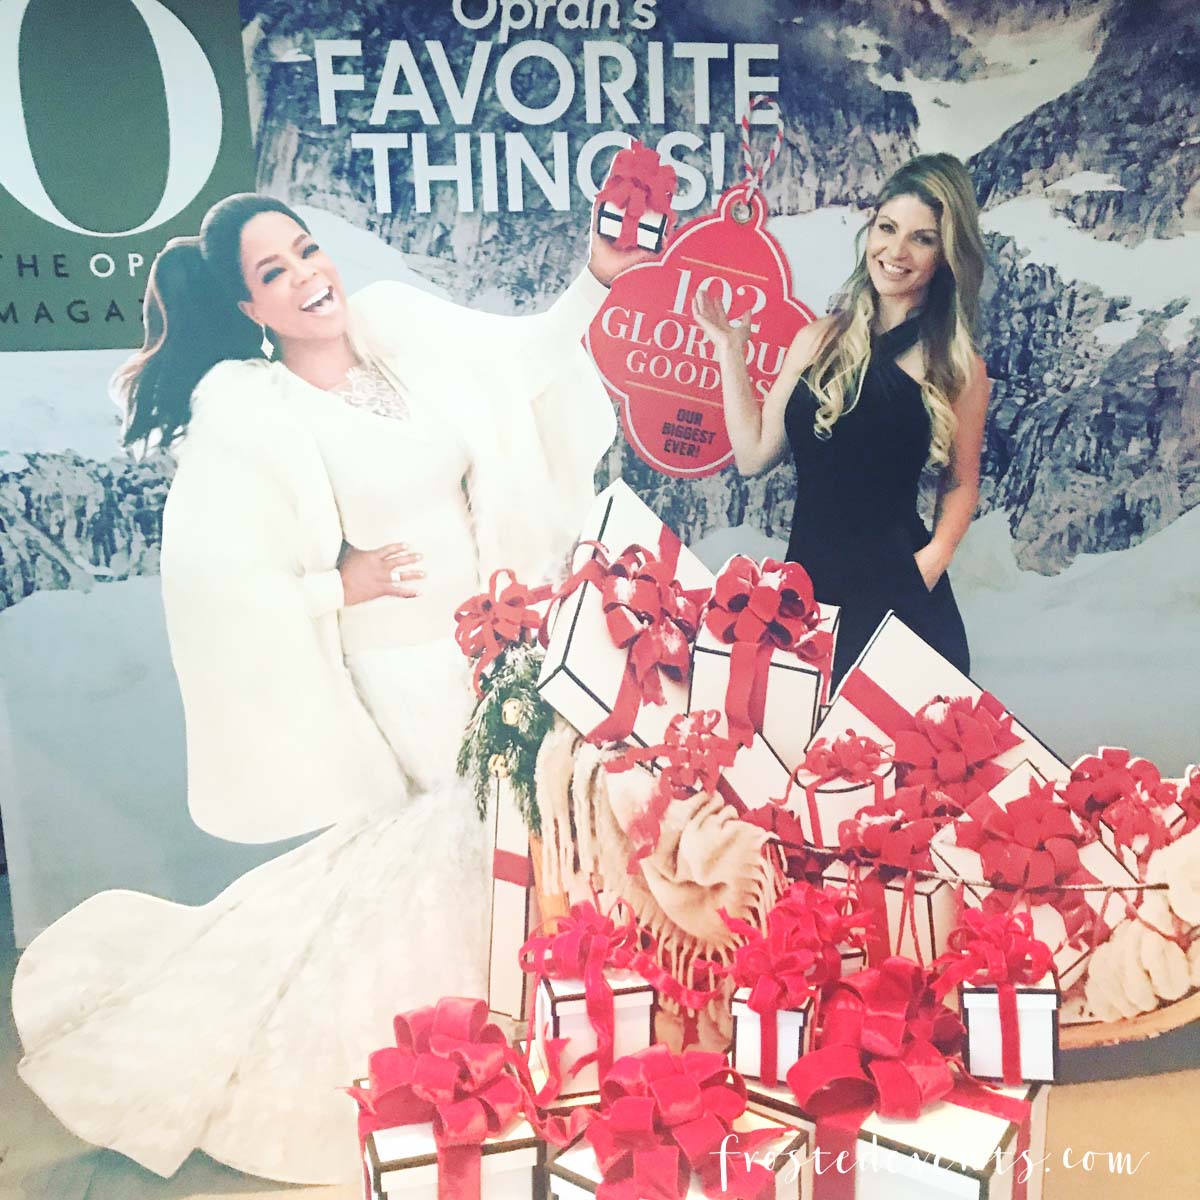 Oprah's Favorite Things 2017 Party - How this mom got to go to the best holiday party ever, get all the gifts and drink tequila with Oprah Winfrey -via Misty Nelson, mom blogger and influencer @frostedevents frostedblog.com